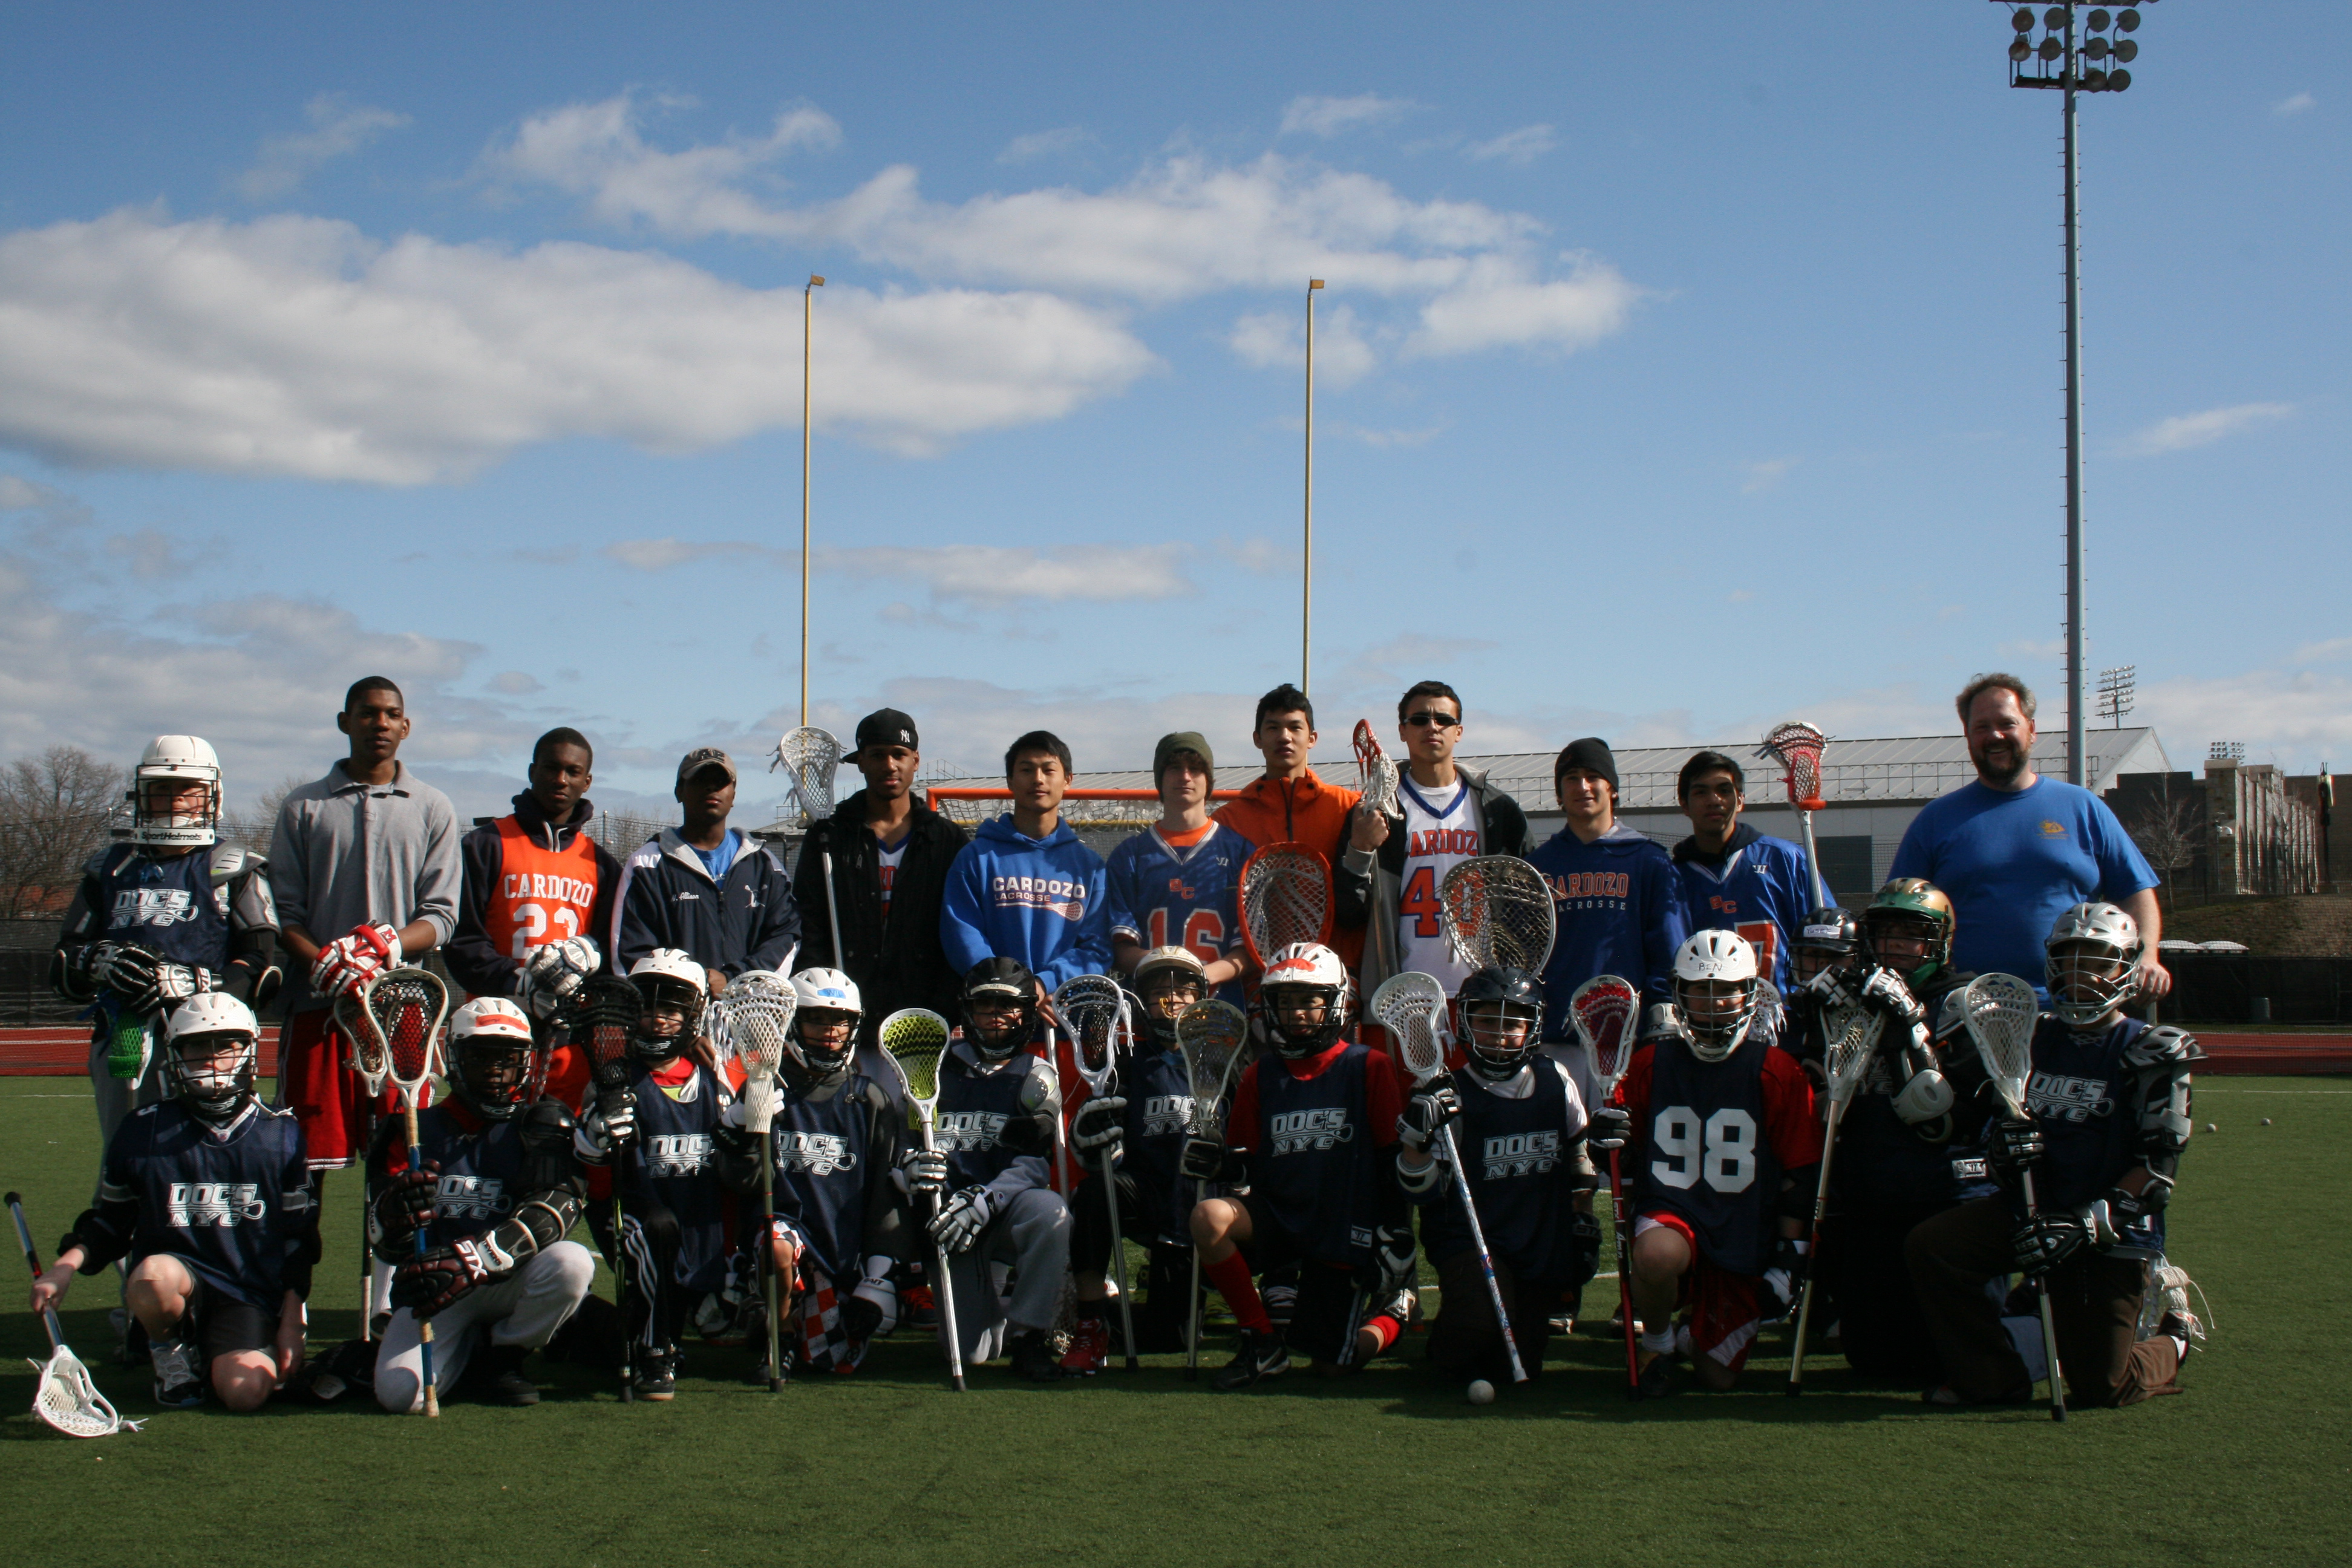 Doc's Queen Lacrosse program after their first session March 2011.